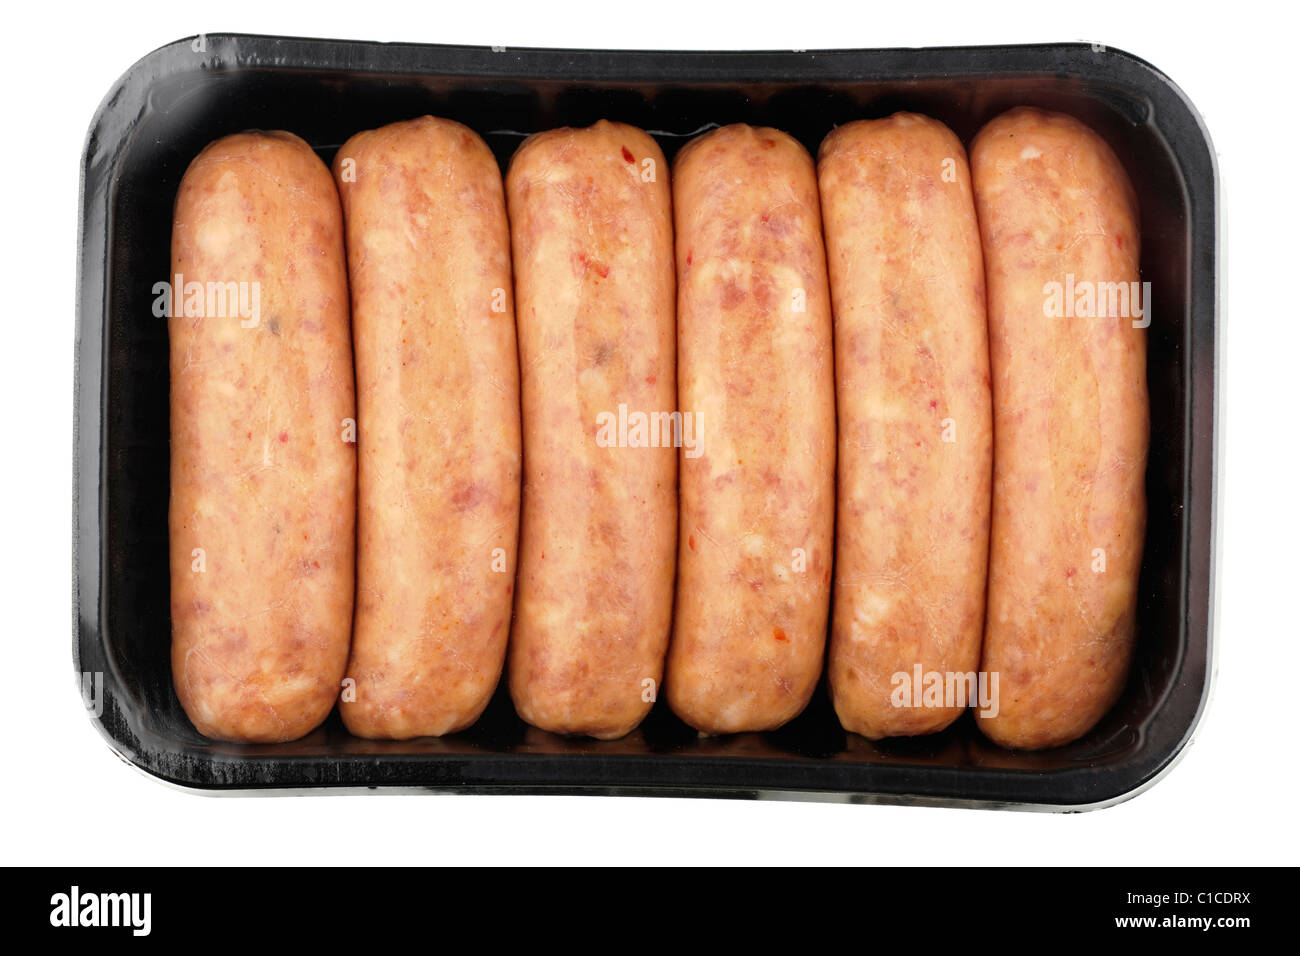 Six sweet chillie sausages in a plastic tray covered with clear cellophane wrapping Stock Photo